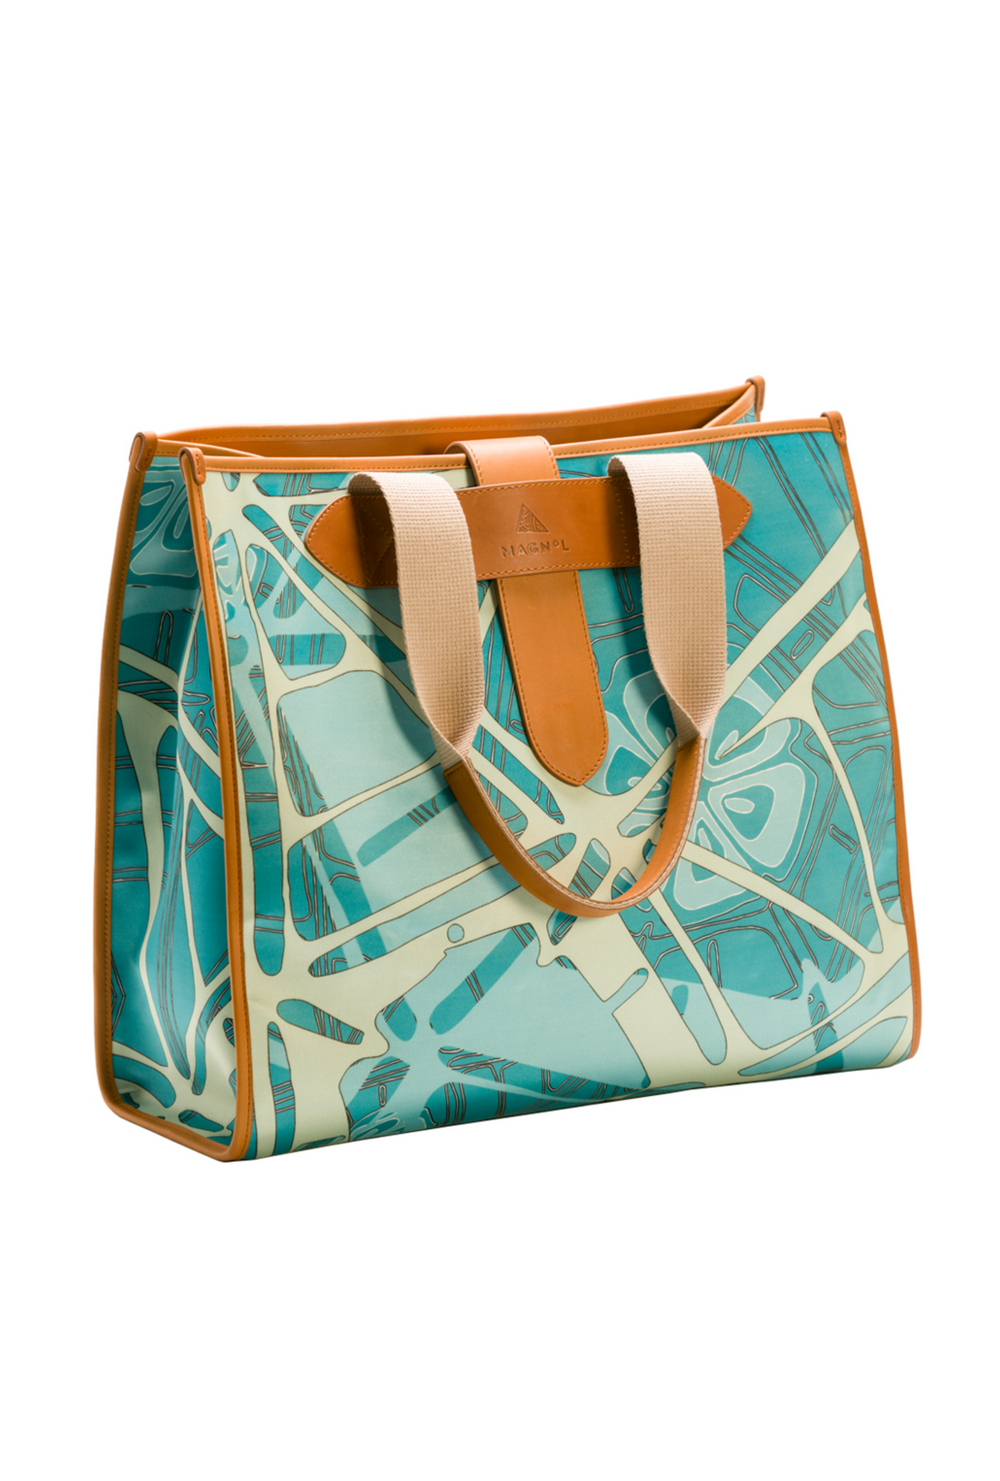 COLONY - GHOST NETS TOTE BAG - SEA GREEN